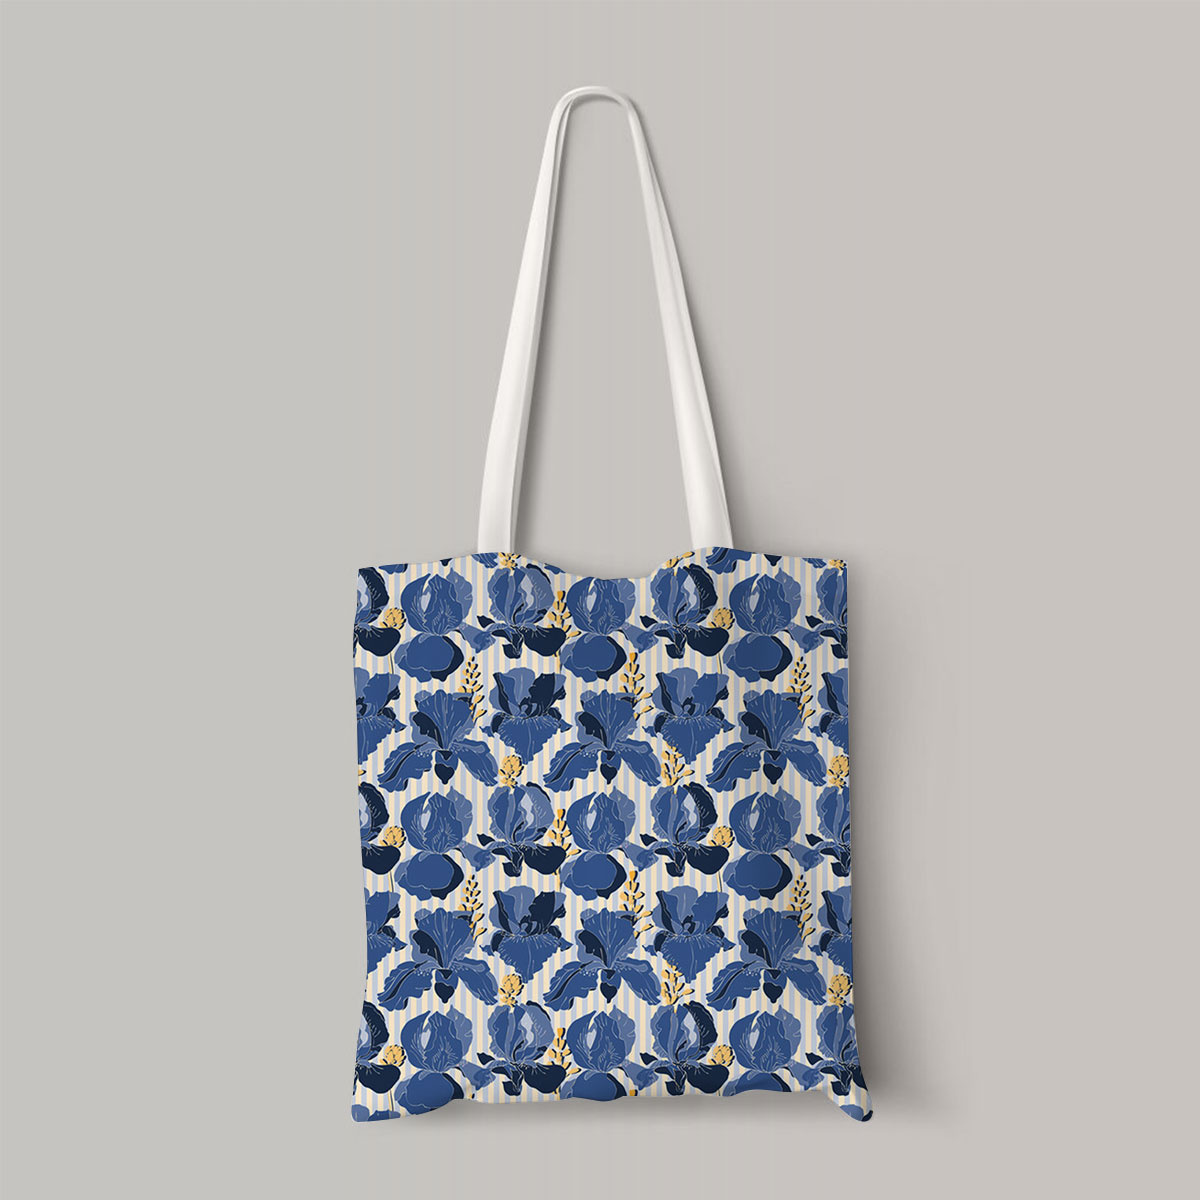 Blue Iris Flowers Isolated On A Light White And Yellow Striped Totebag